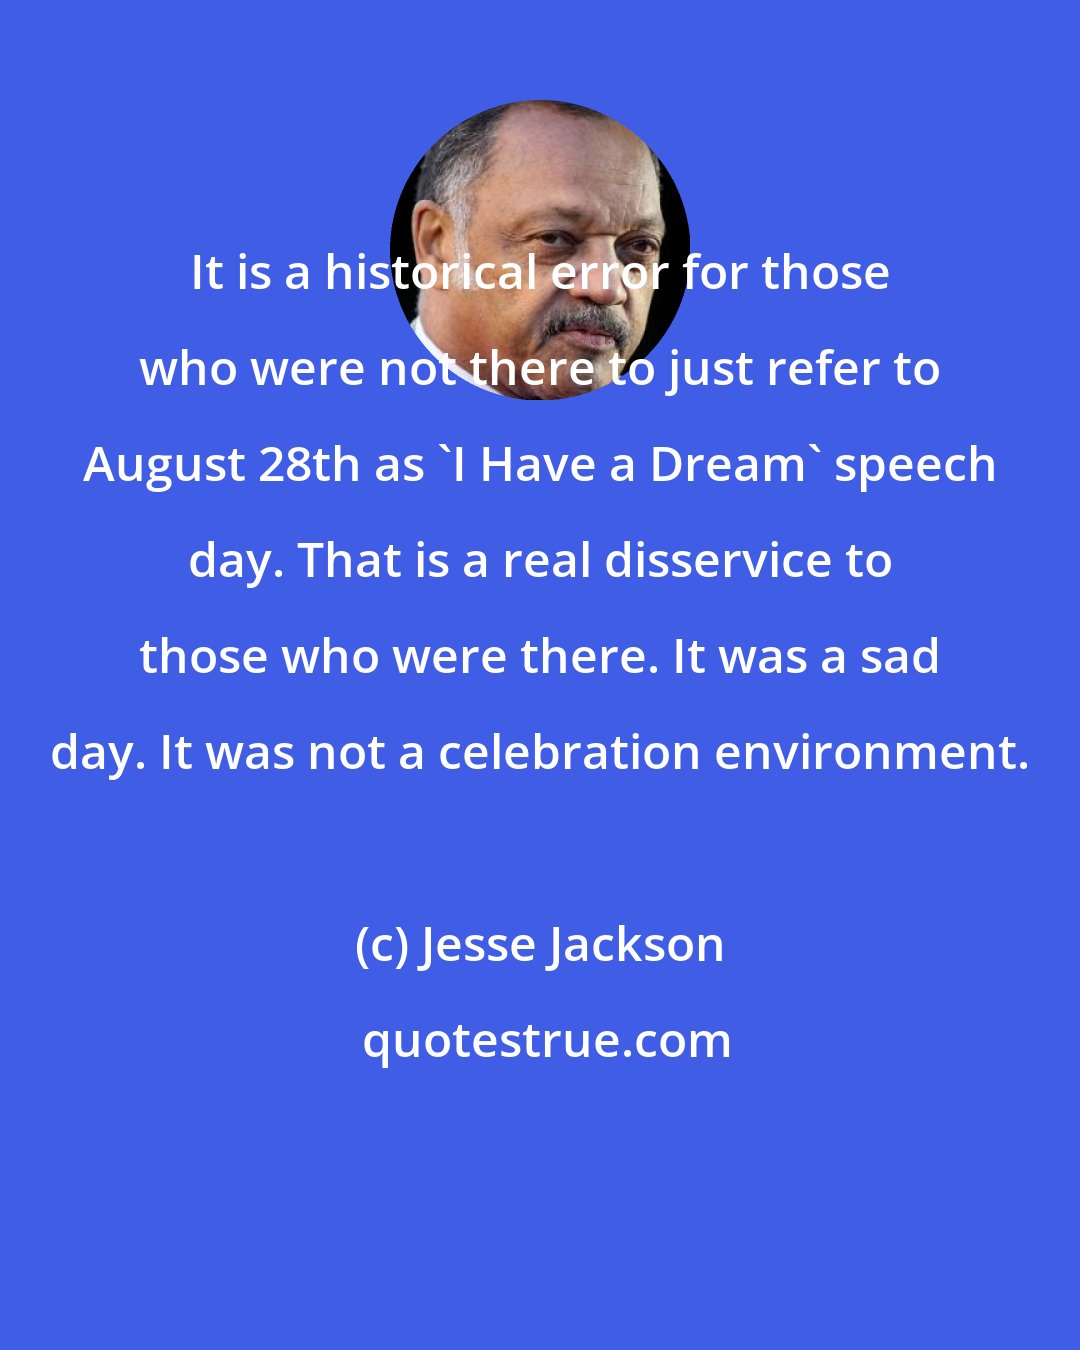 Jesse Jackson: It is a historical error for those who were not there to just refer to August 28th as 'I Have a Dream' speech day. That is a real disservice to those who were there. It was a sad day. It was not a celebration environment.